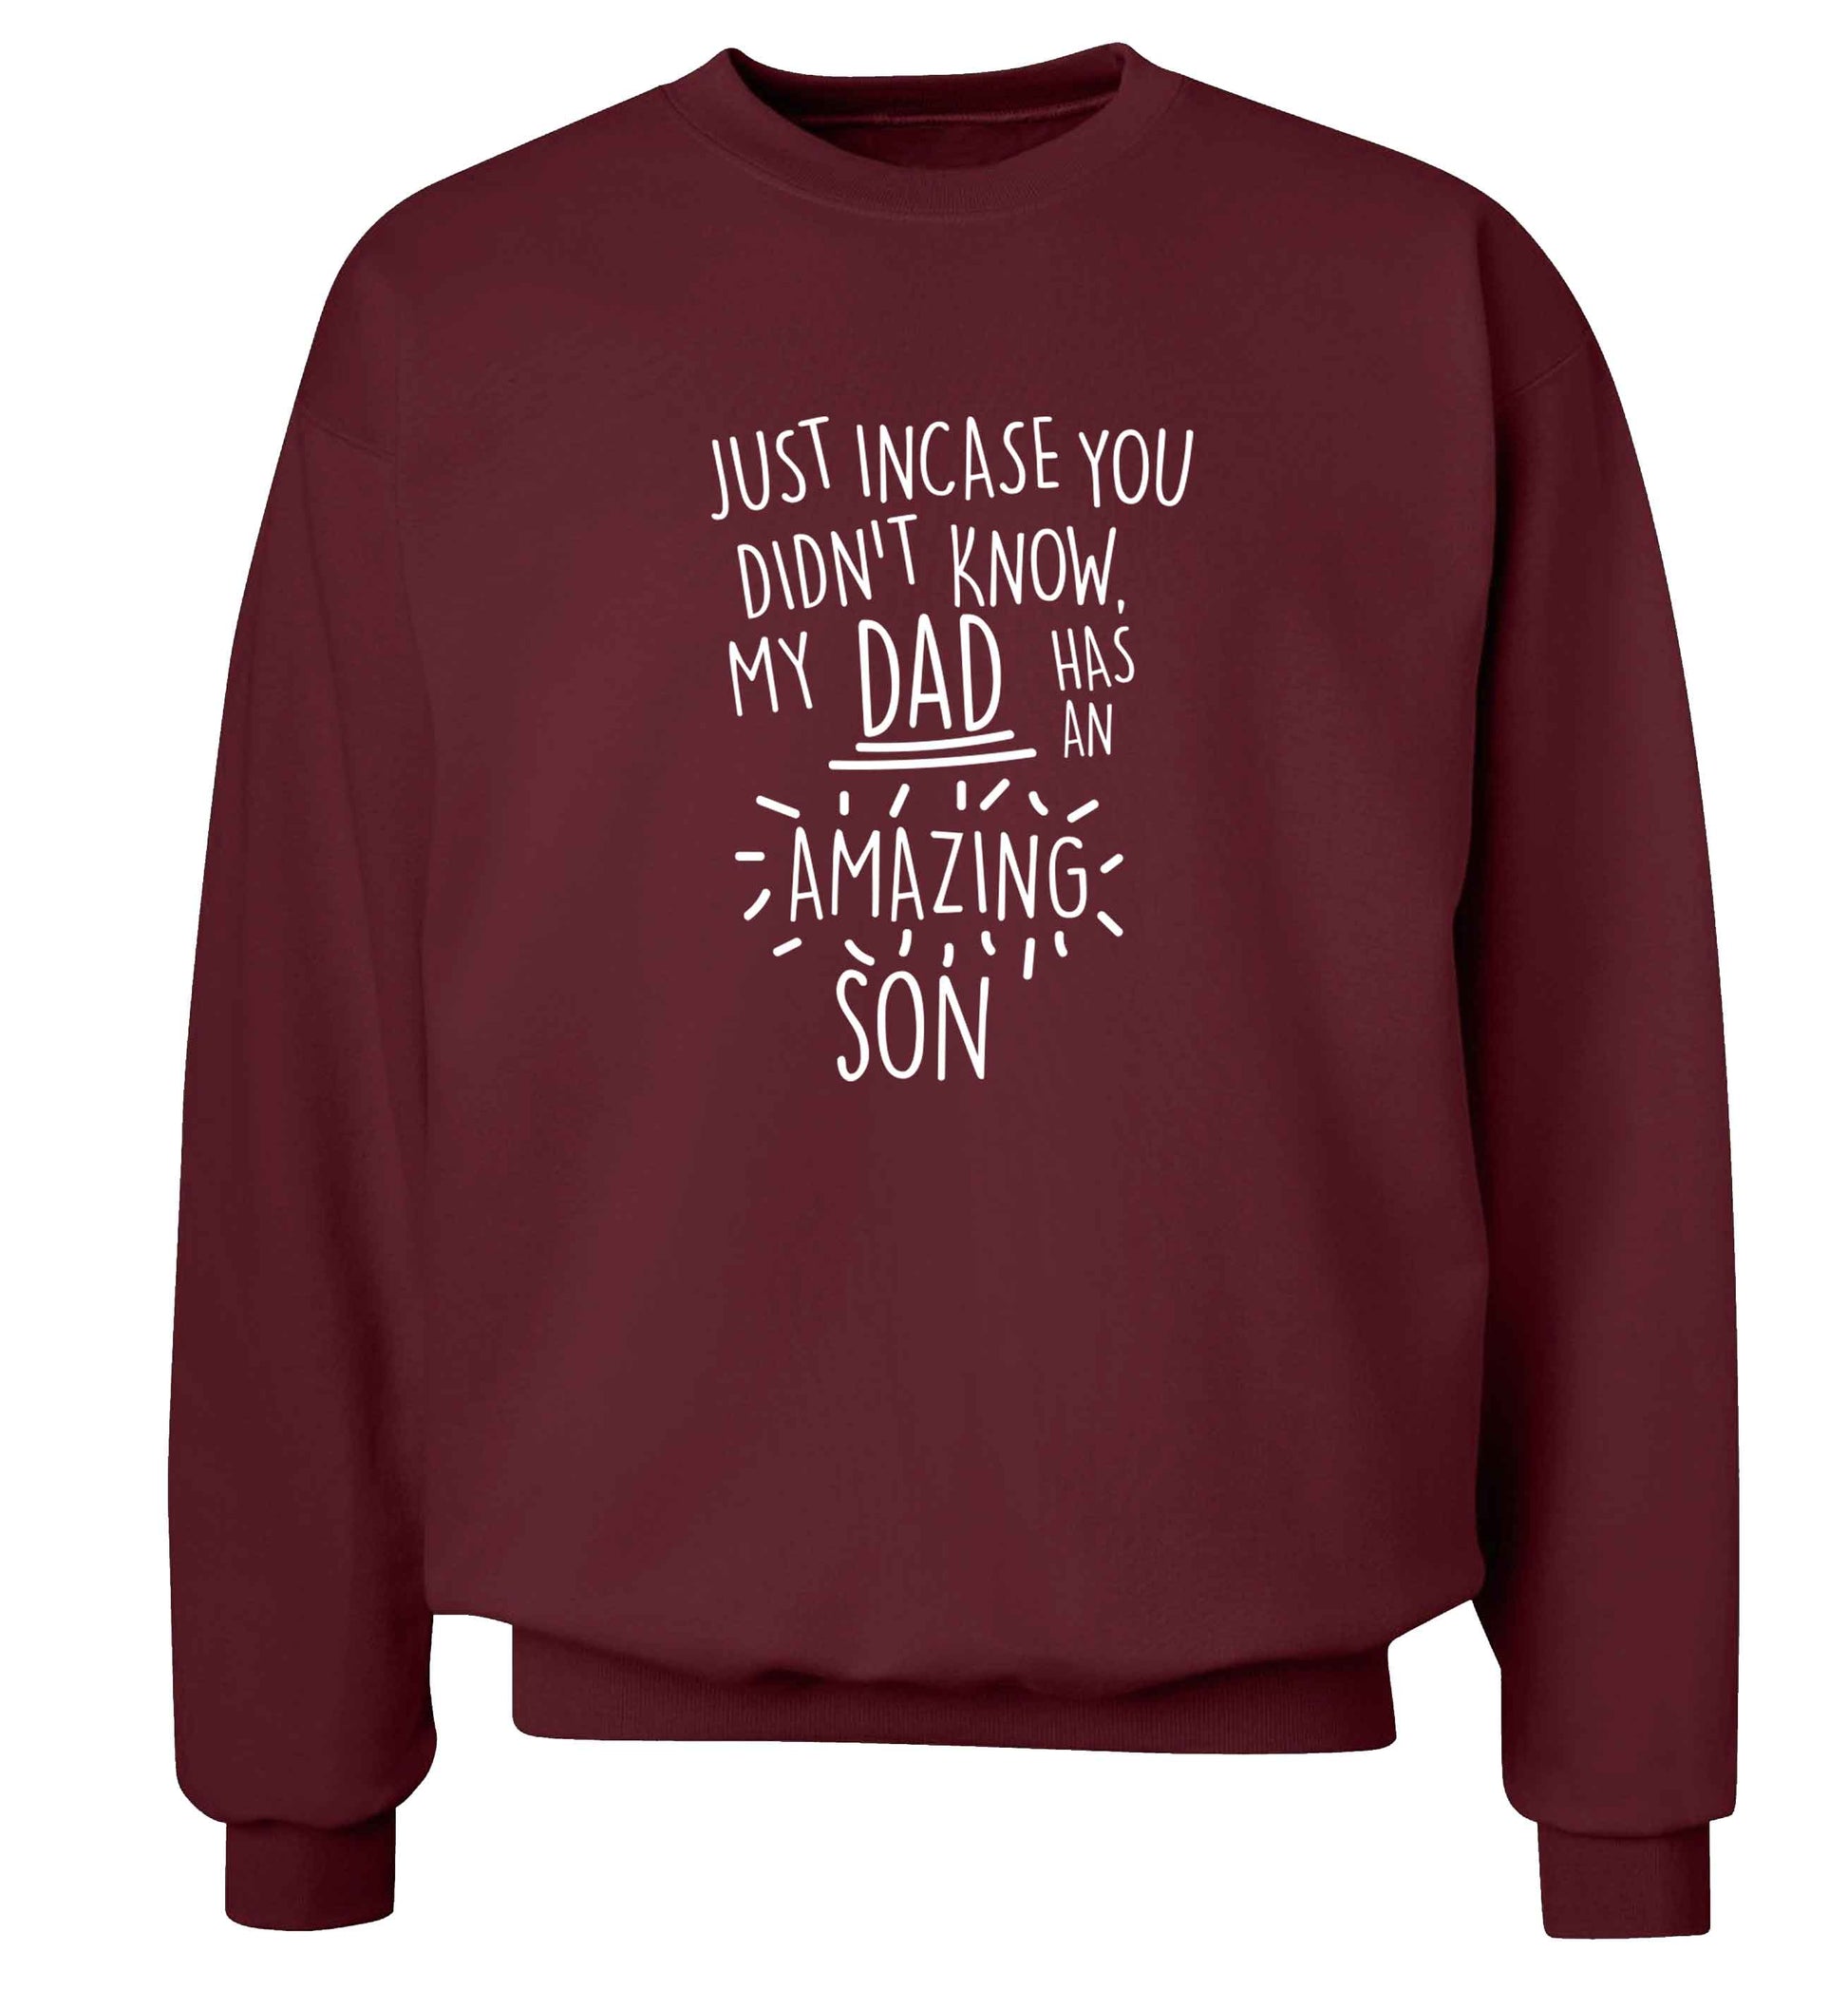 Just incase you didn't know my dad has an amazing son adult's unisex maroon sweater 2XL